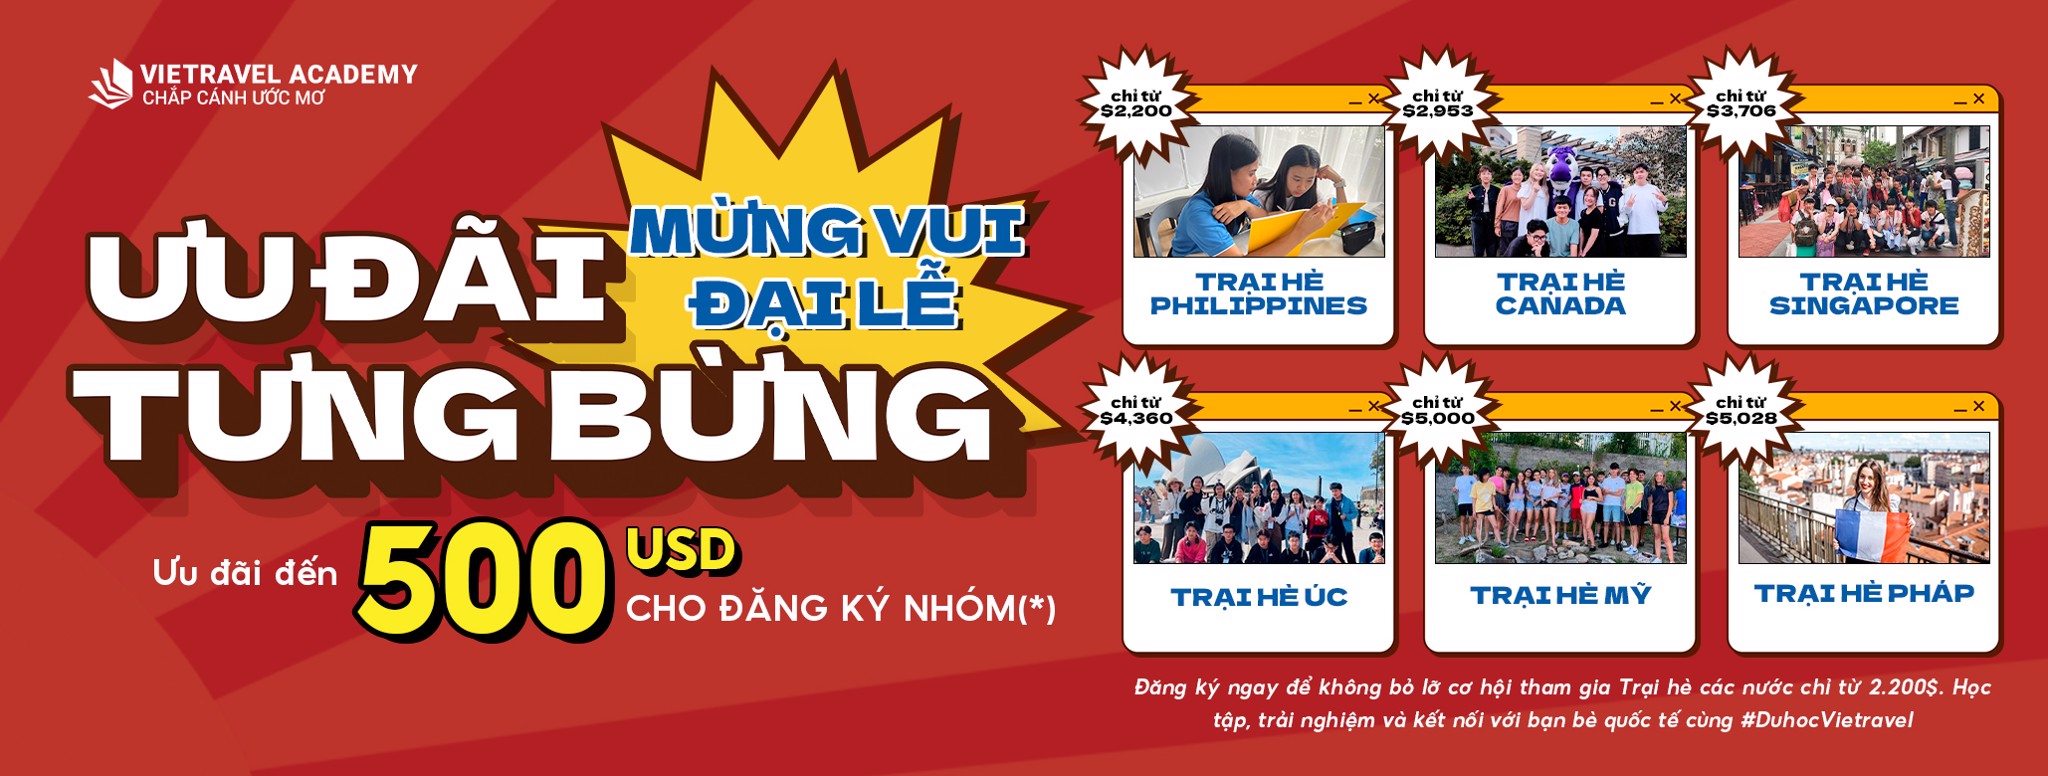 Du học tiếng Anh Philippines